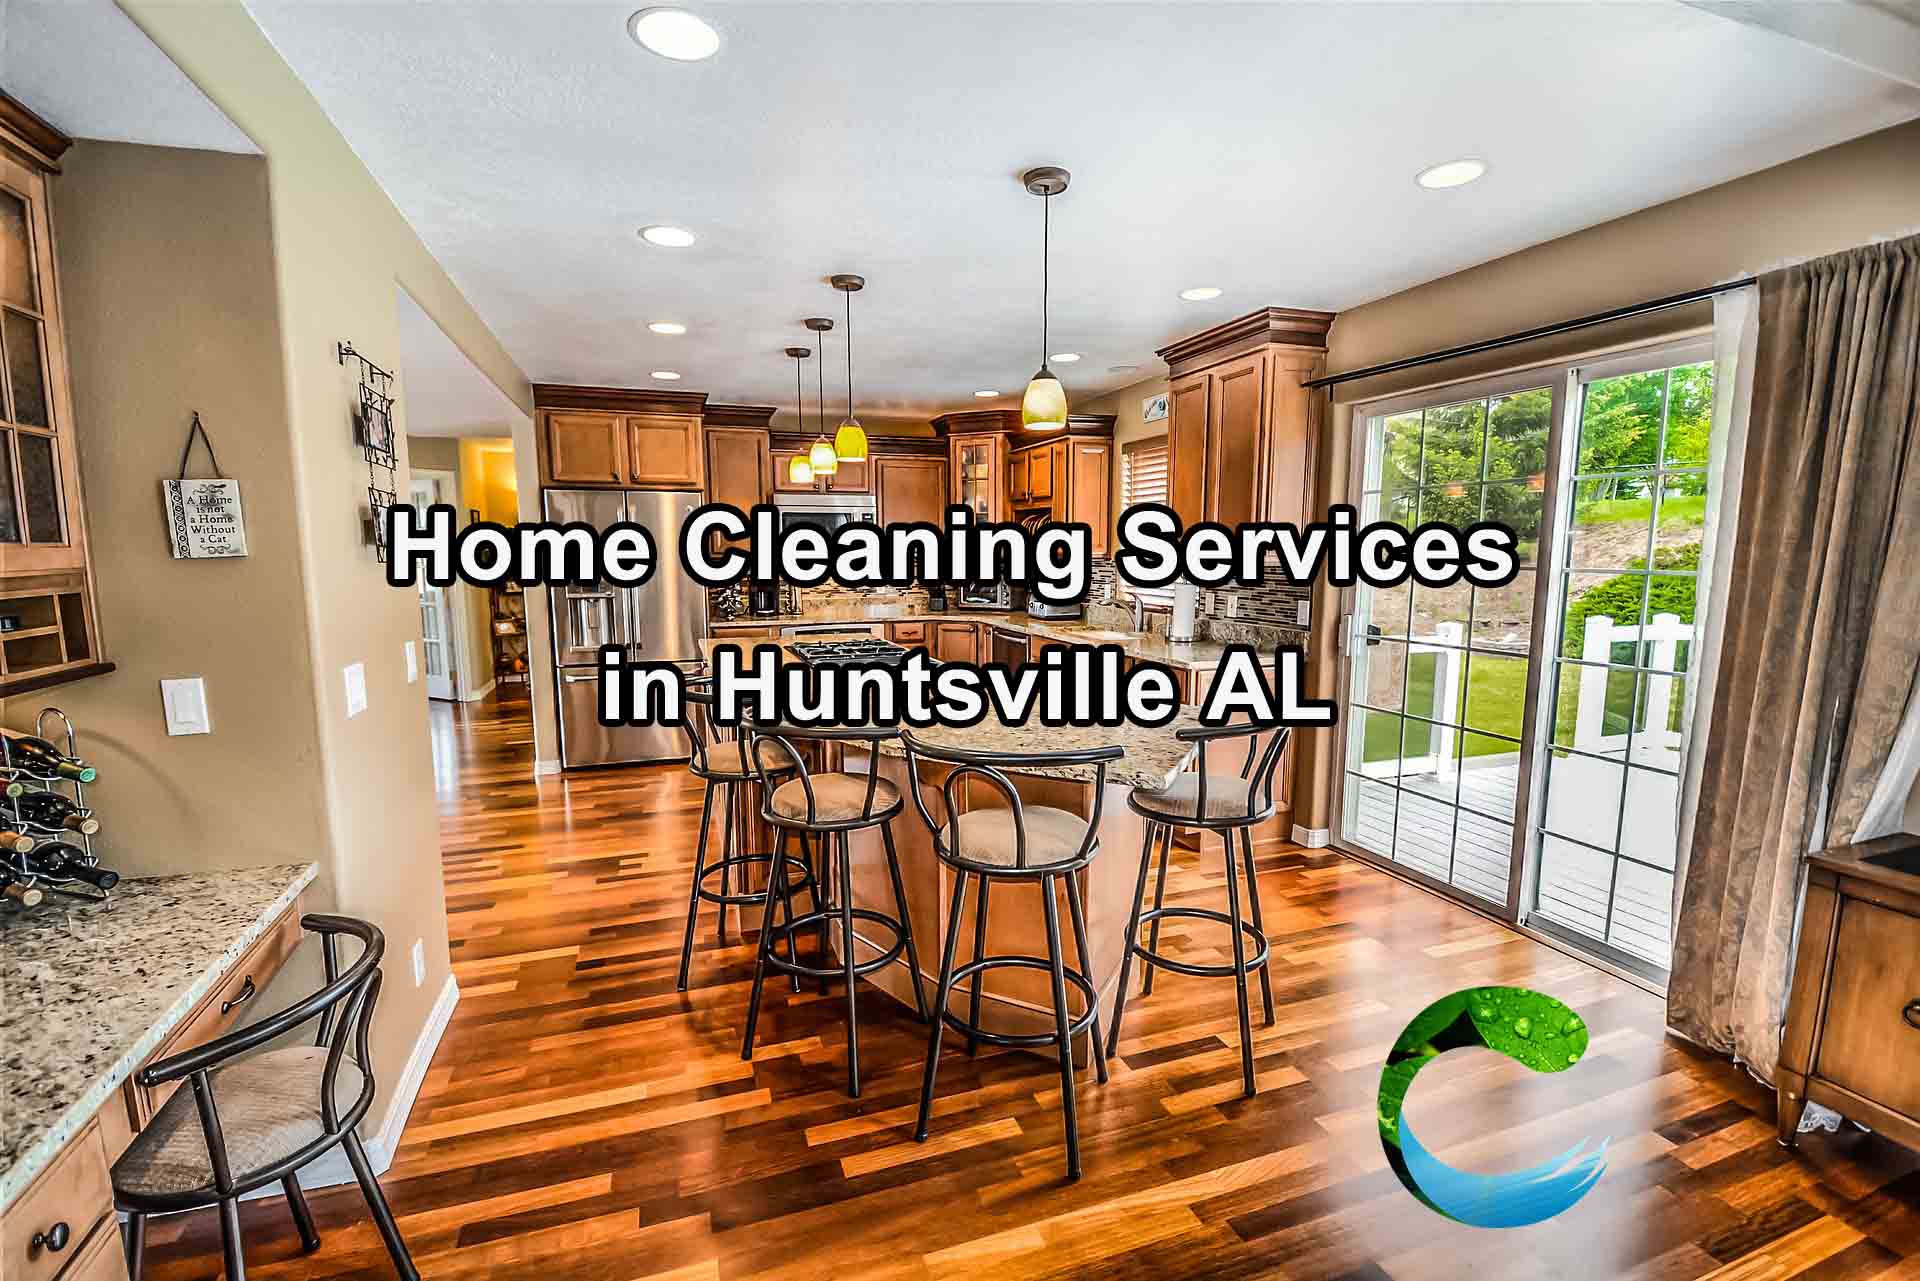 Home Cleaning Services in Huntsville AL